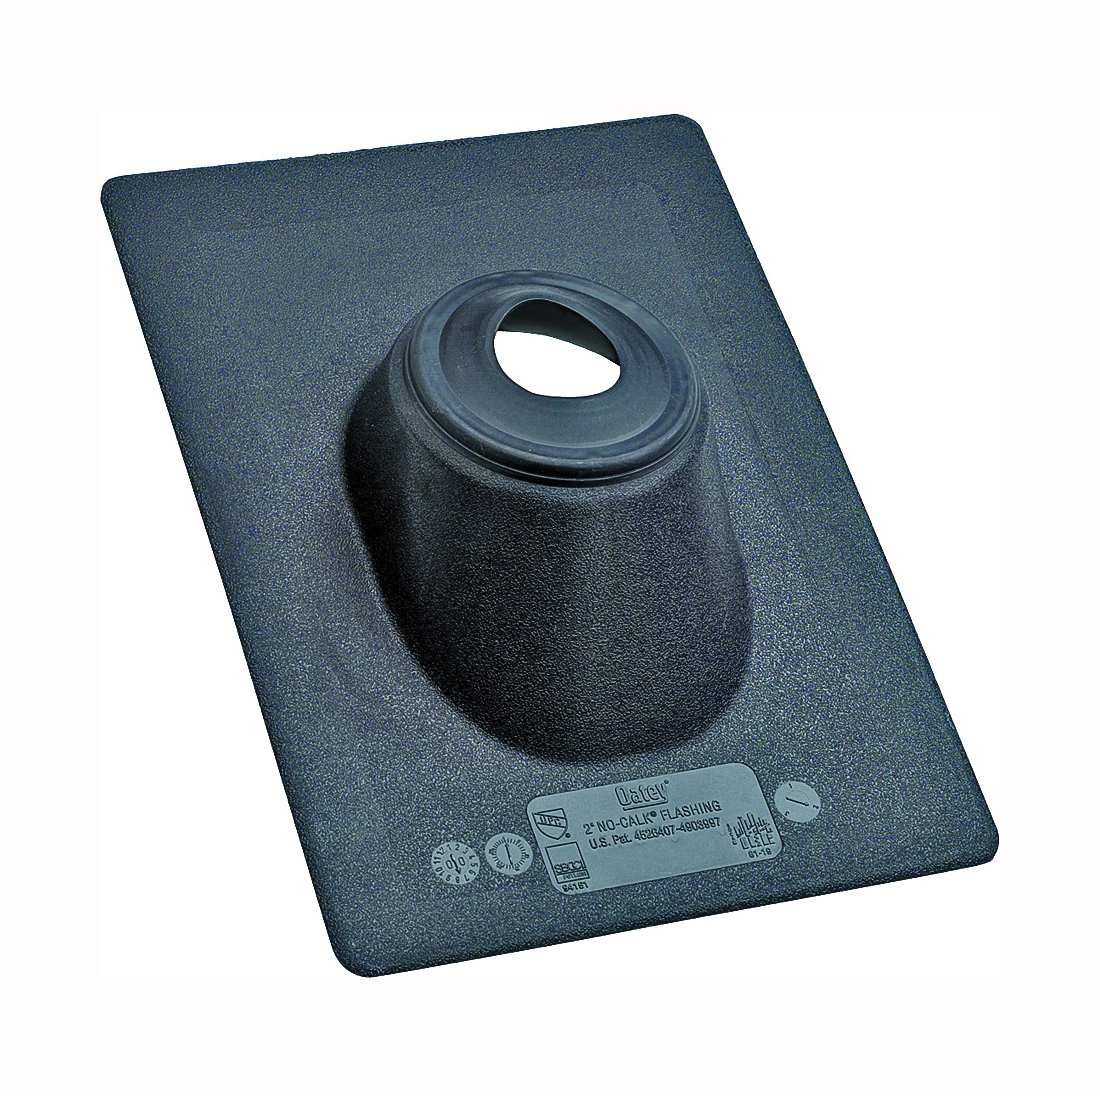 No-Calk Series 11888 Roof Flashing, 18 in OAL, 18 in OAW, Thermoplastic